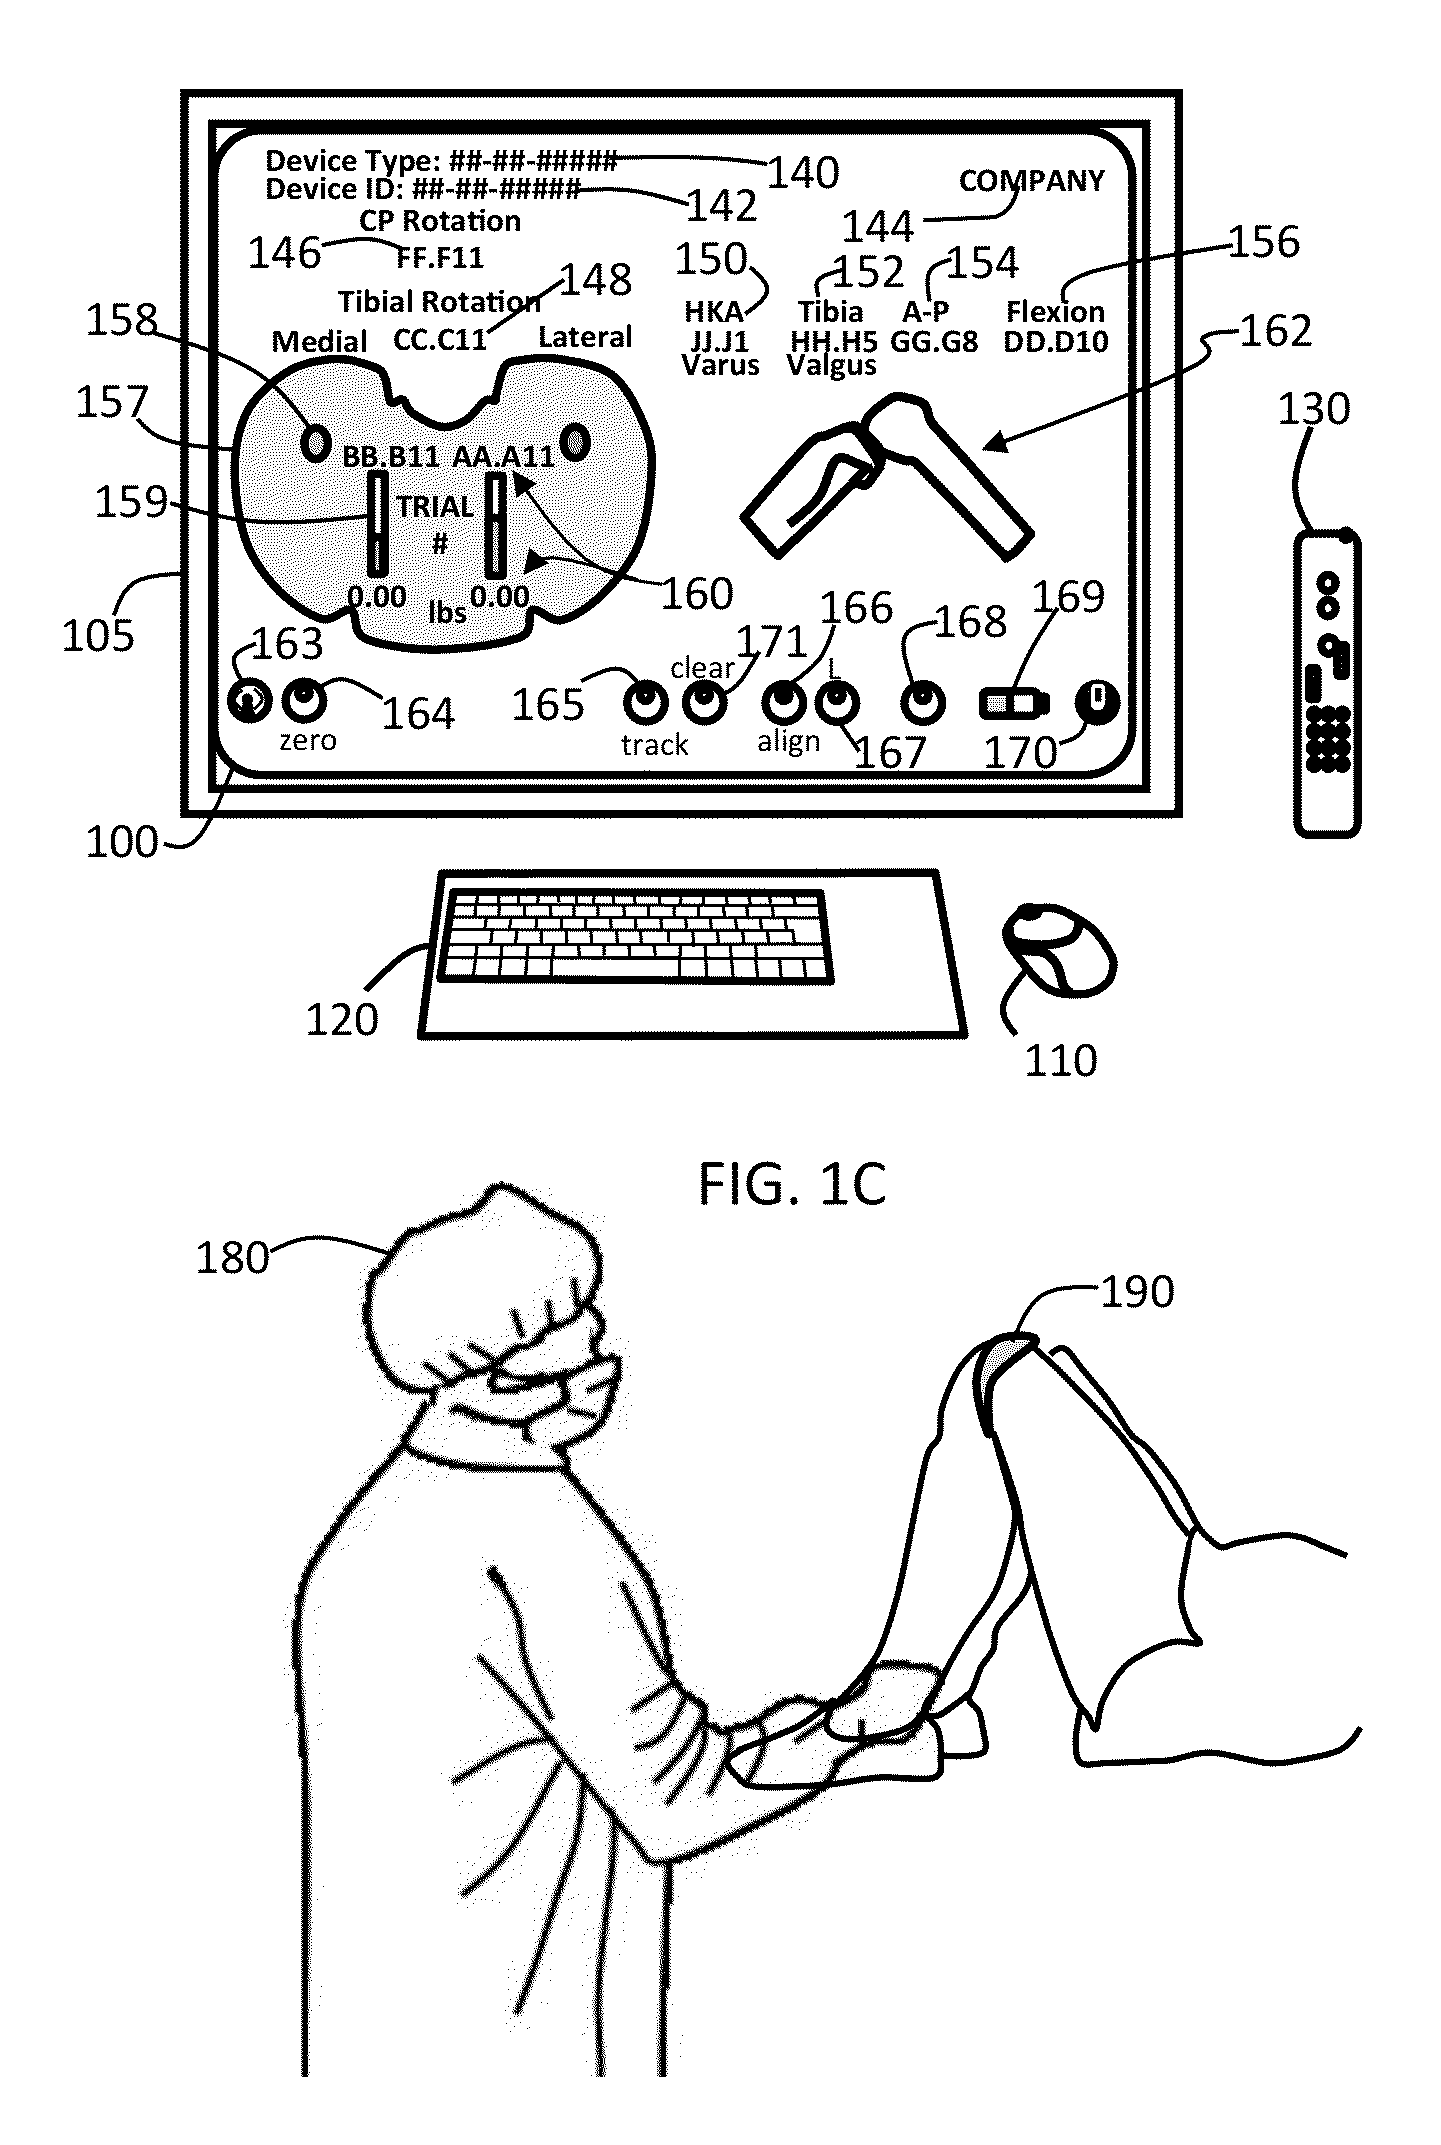 Method of providing feedback to an orthopedic alignment system